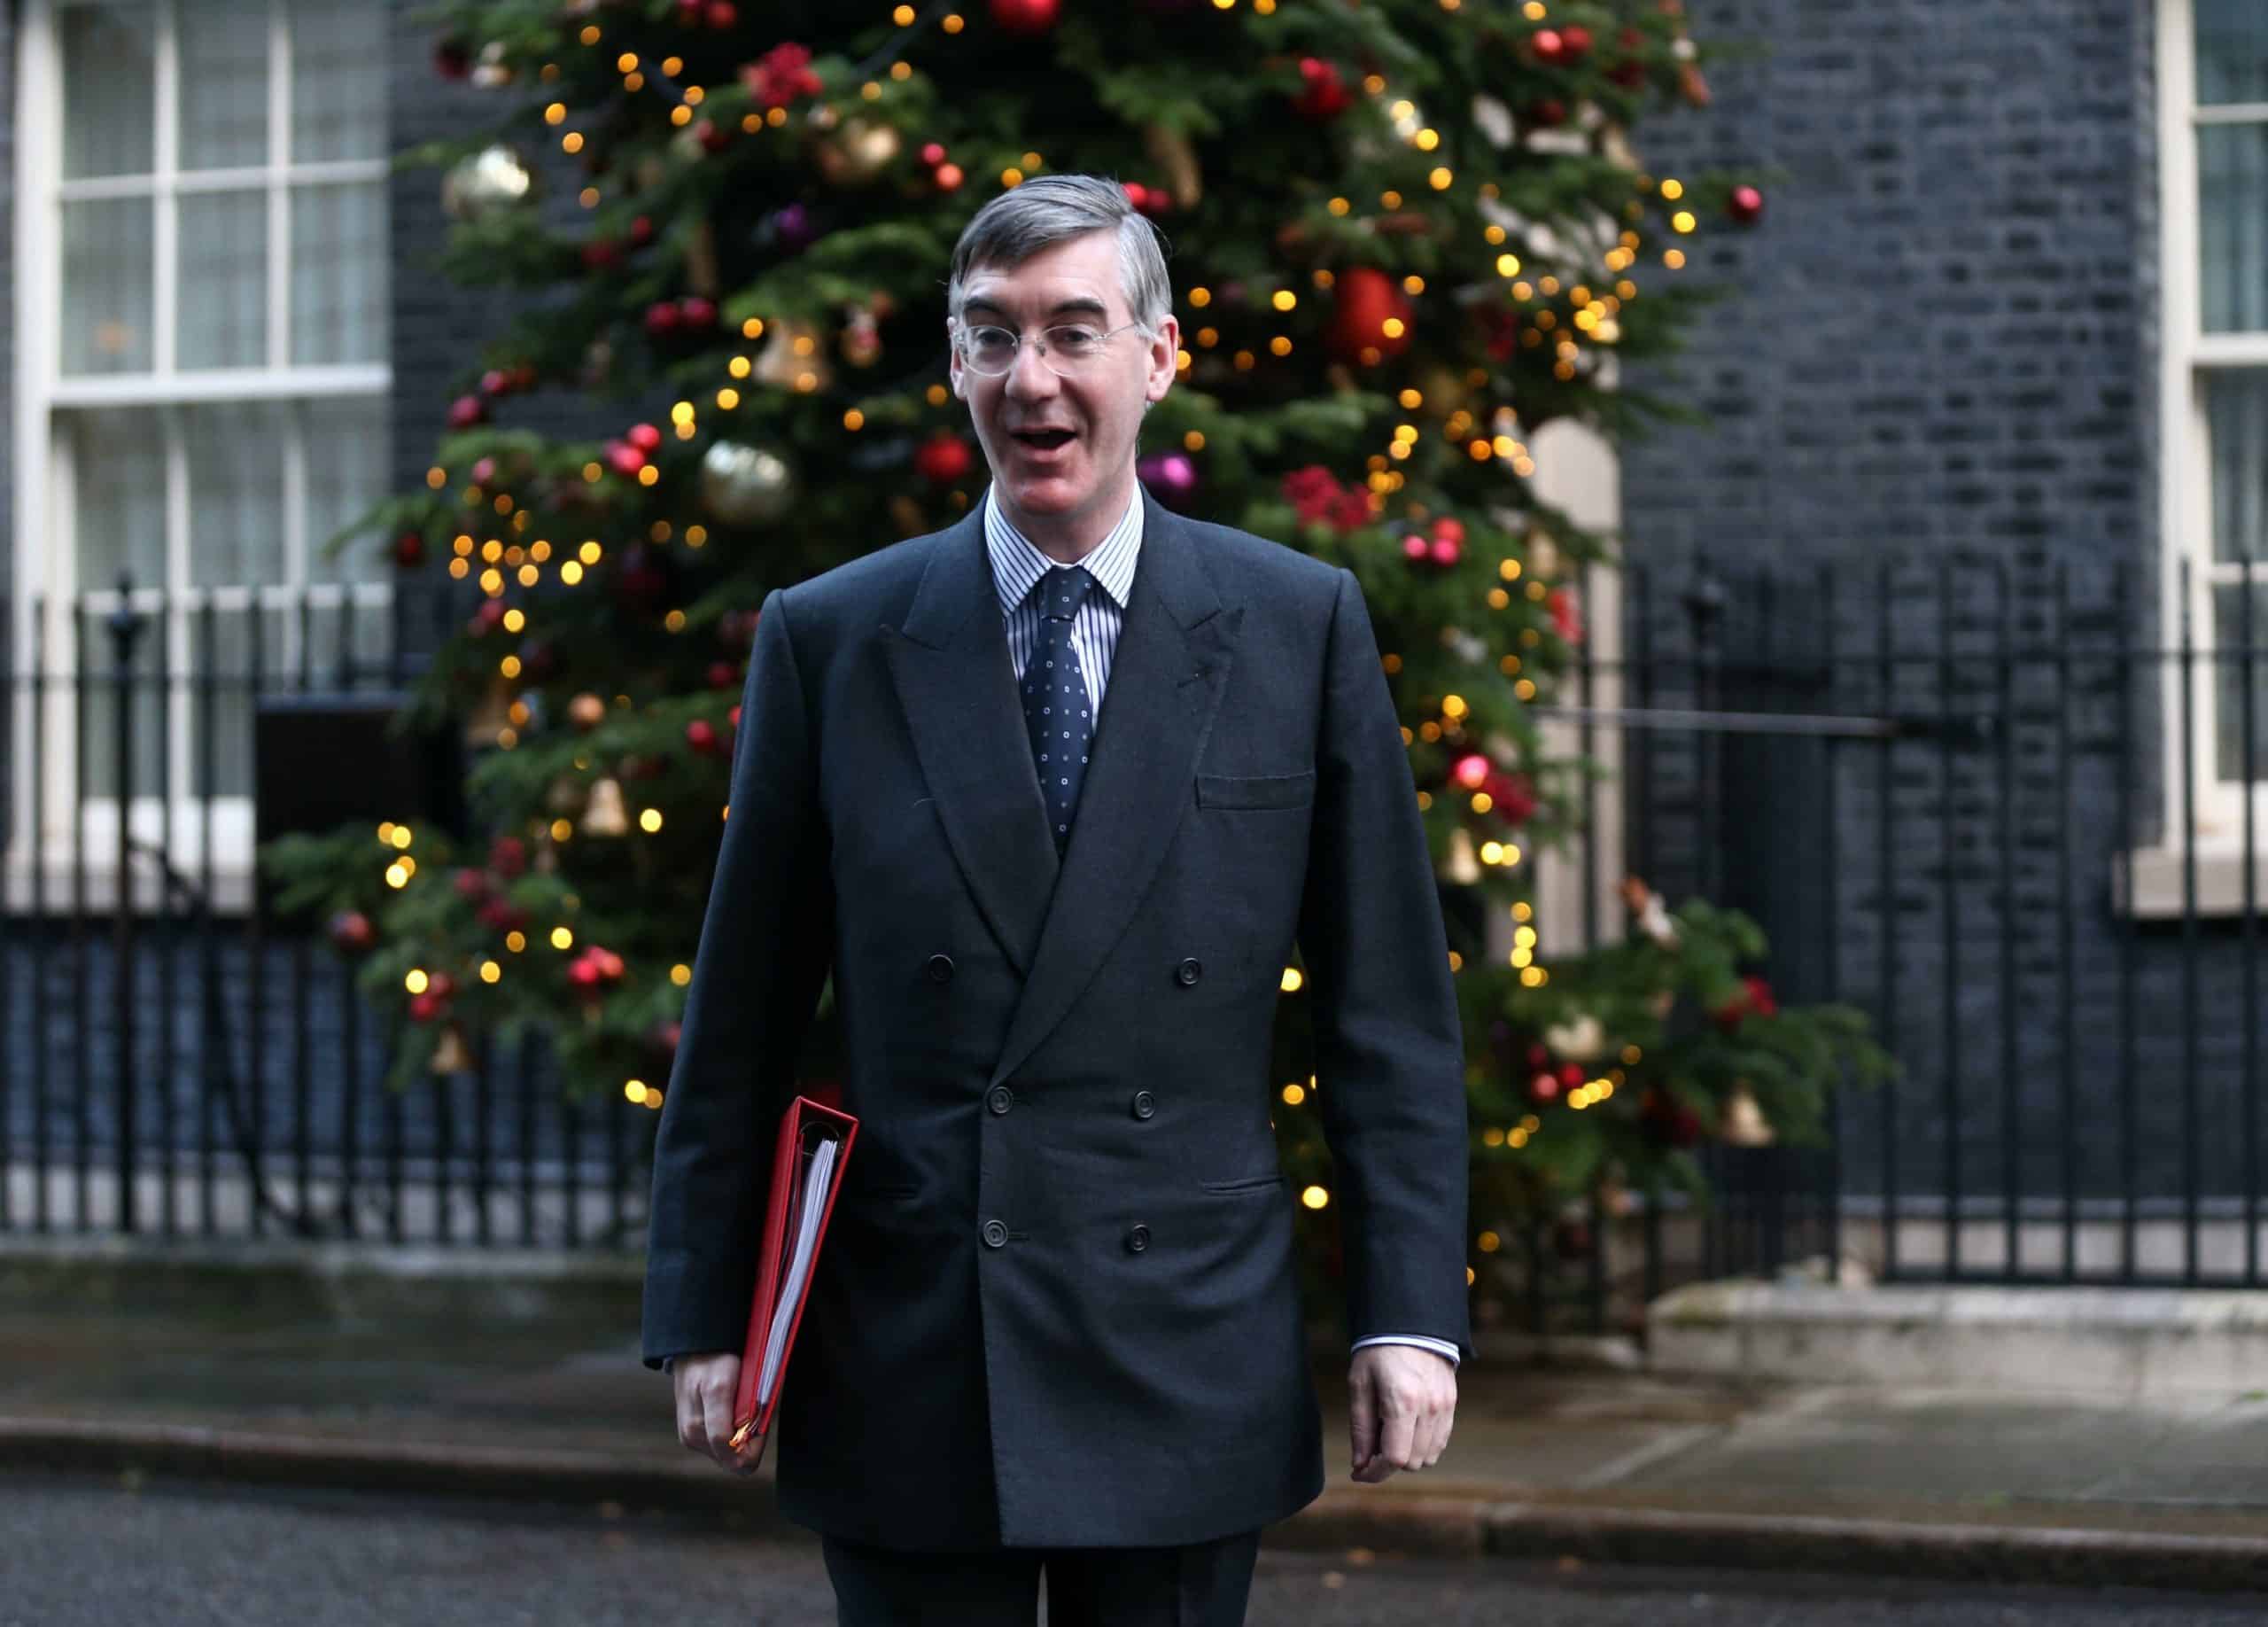 ‘Scrooge’ Rees-Mogg gifted Dickens book by MP amid Unicef backlash